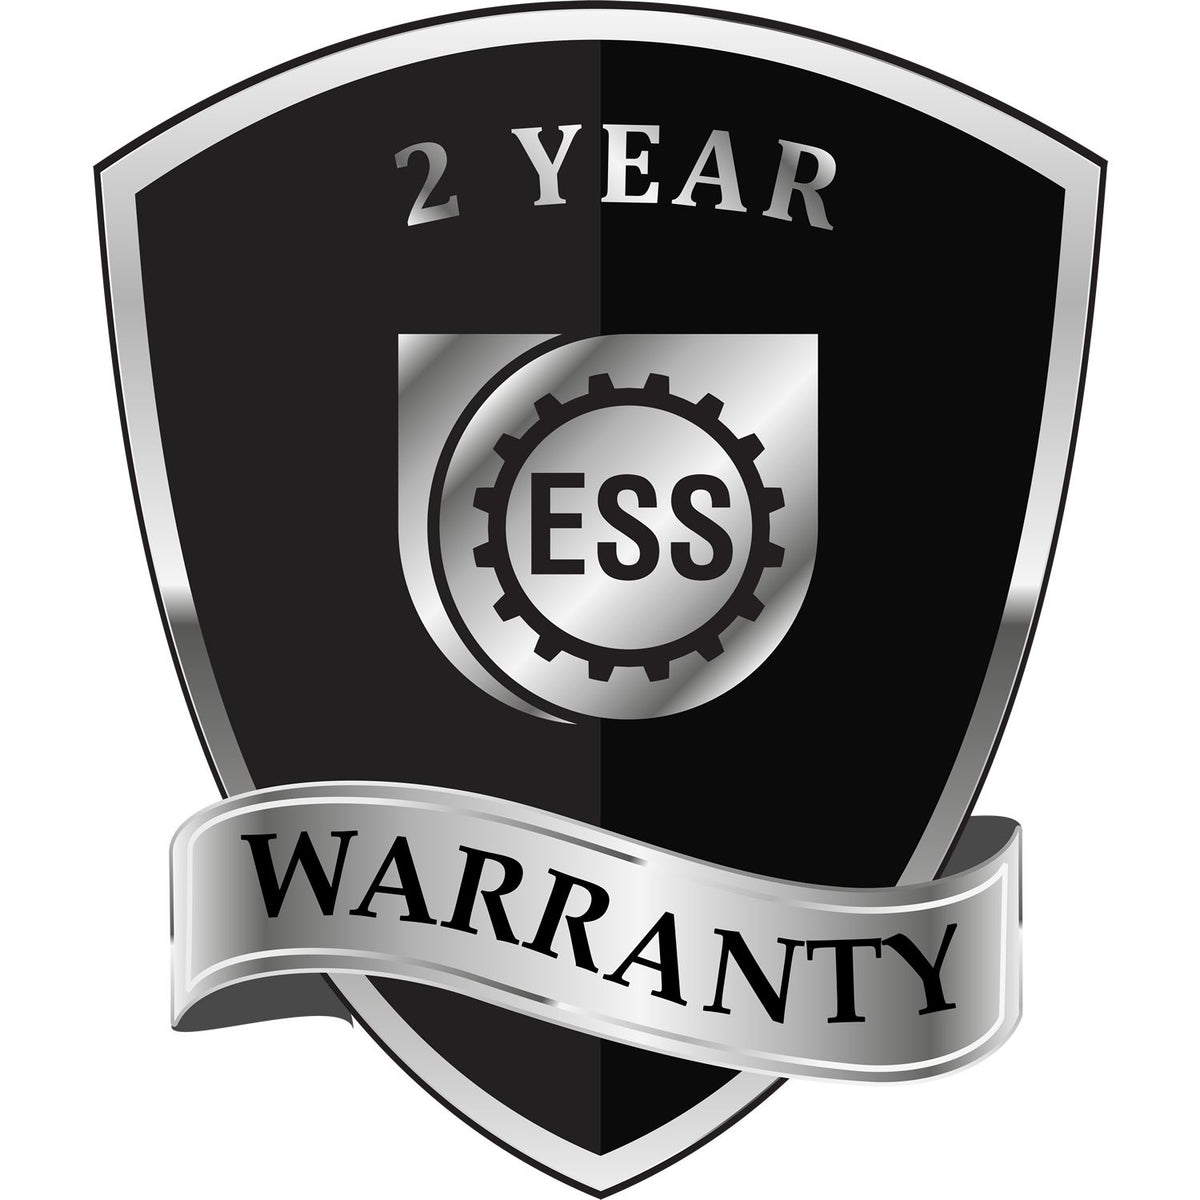 A black and silver badge or emblem showing warranty information for the Handheld Idaho Professional Geologist Embosser